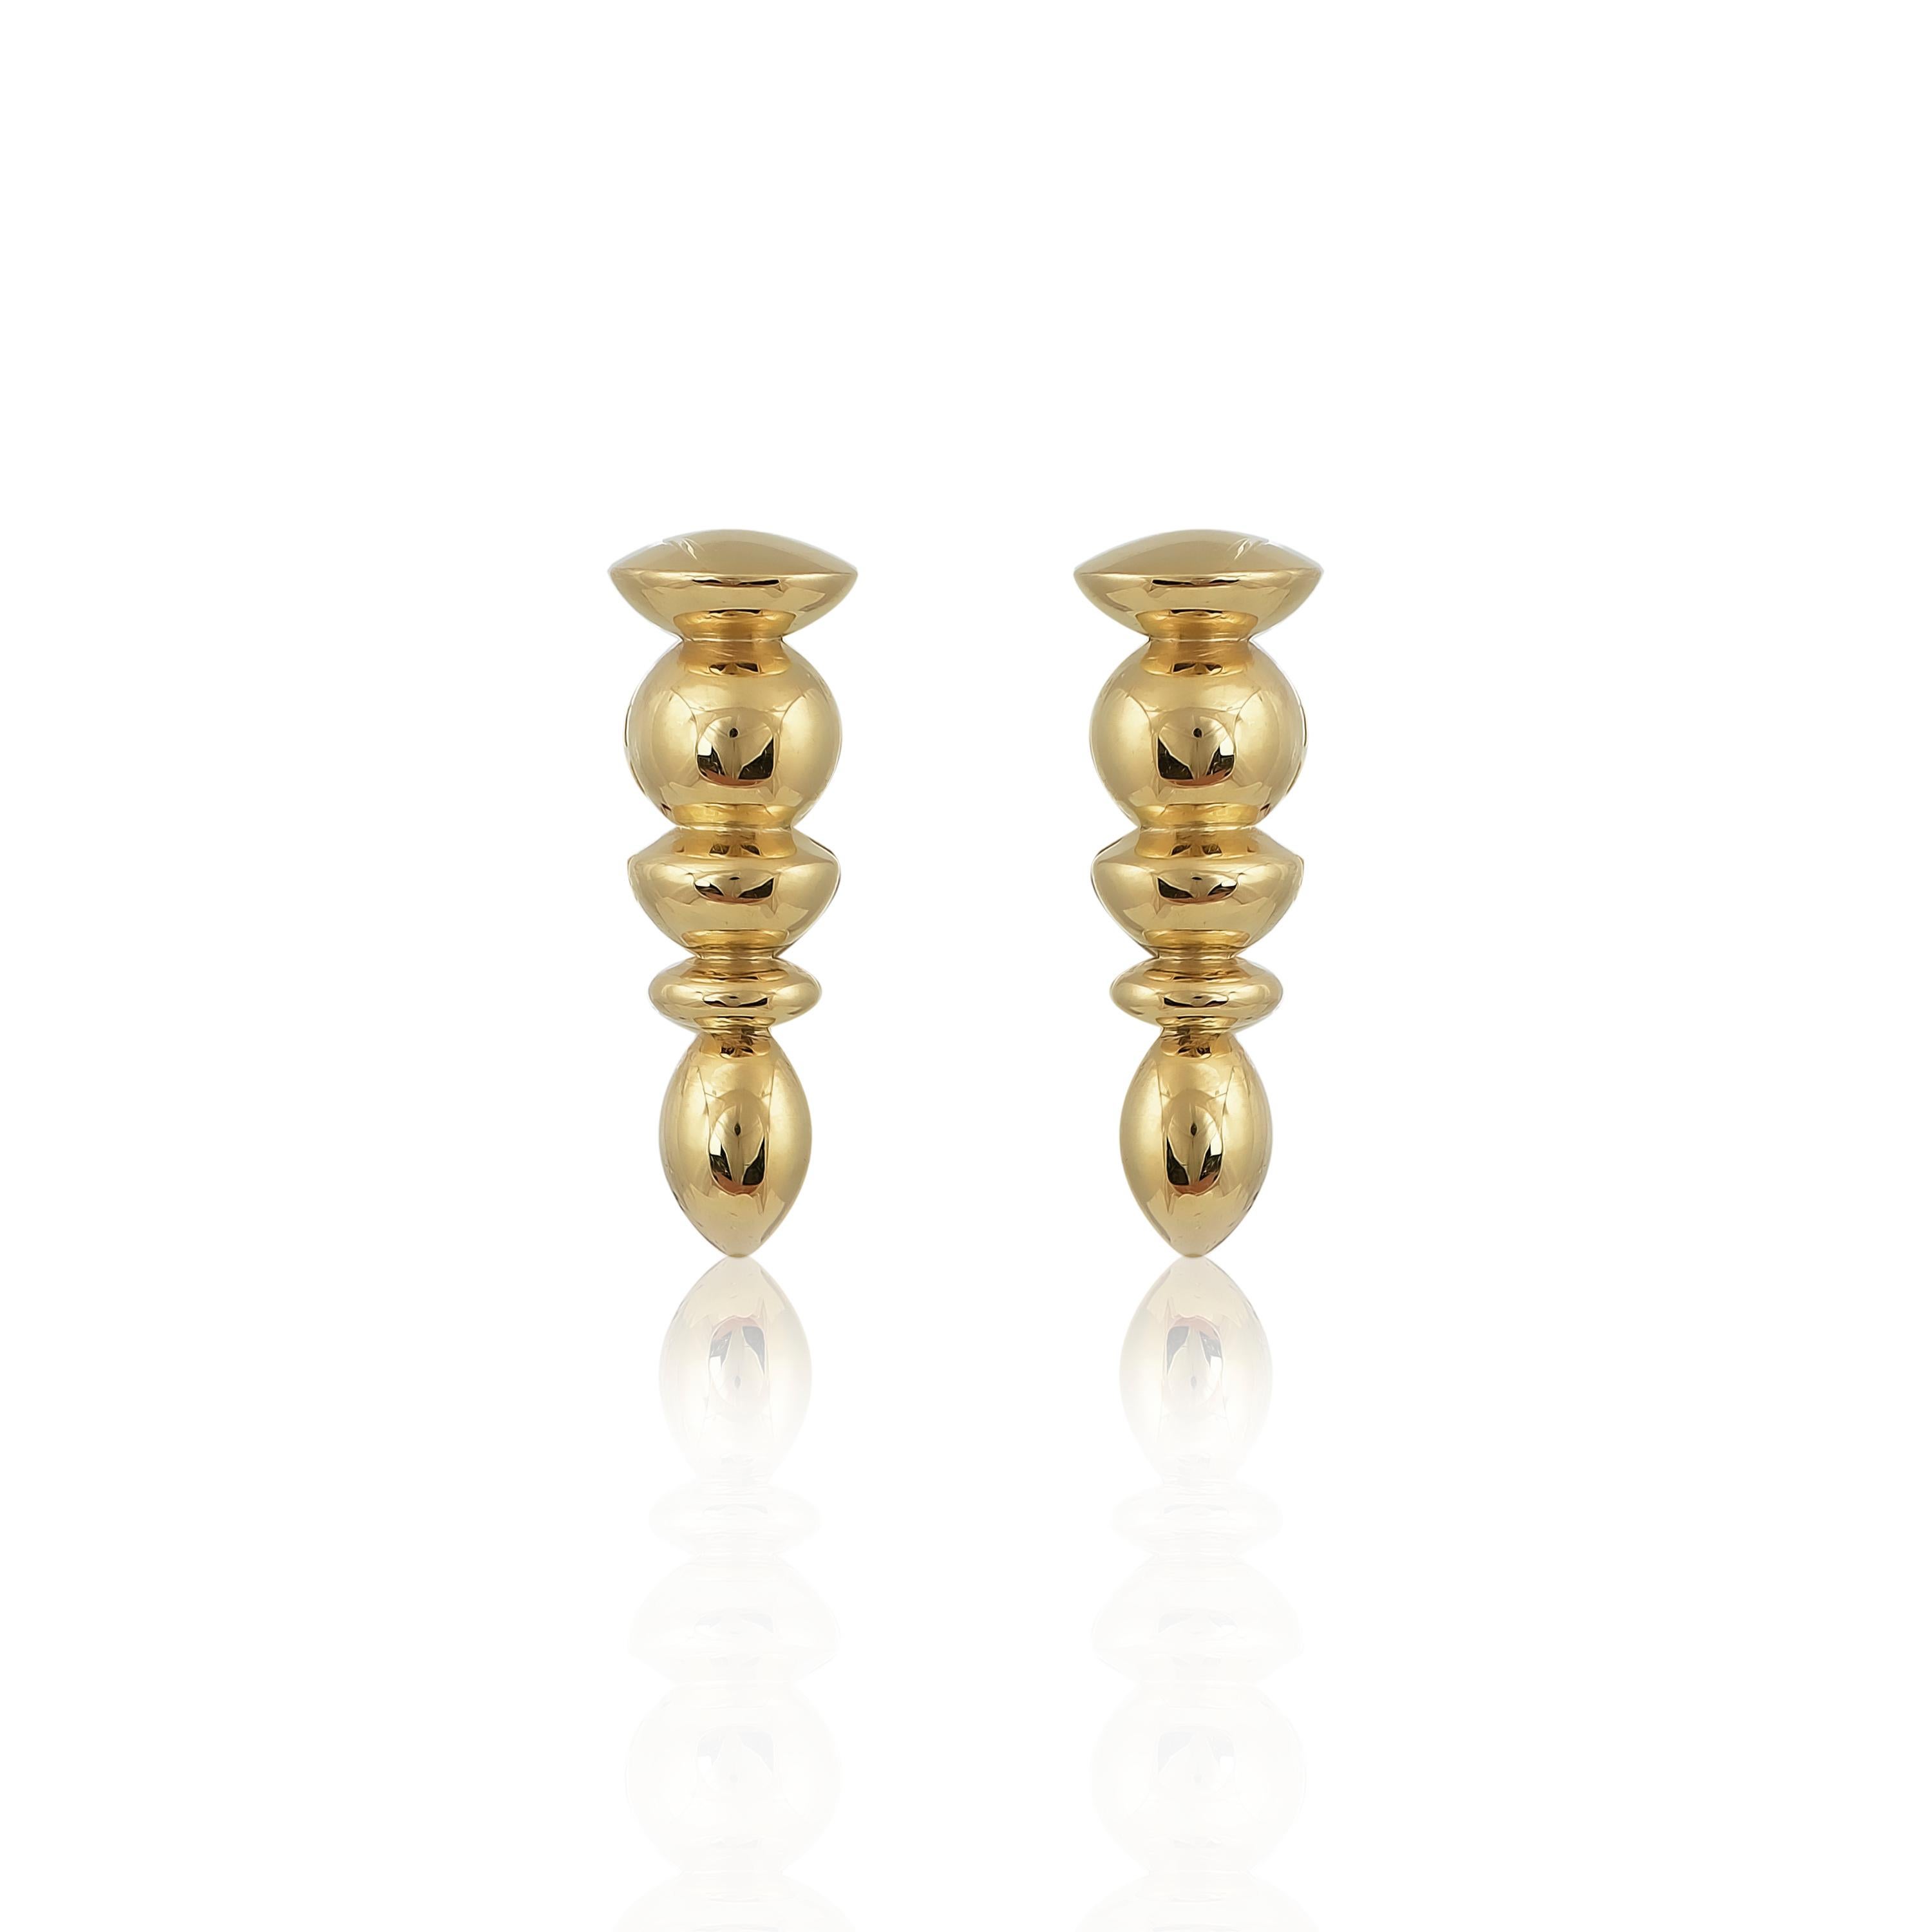 Designer: Alexia Gryllaki
Dimensions: L19x6.7x22mm
Weight: approximately 12.3g (pair)  
Barcode: NEX3004

Totem cufflinks in 18 karat yellow gold  and they can be customised by setting a sapphire on the back of both cufflinks, or engraving the back